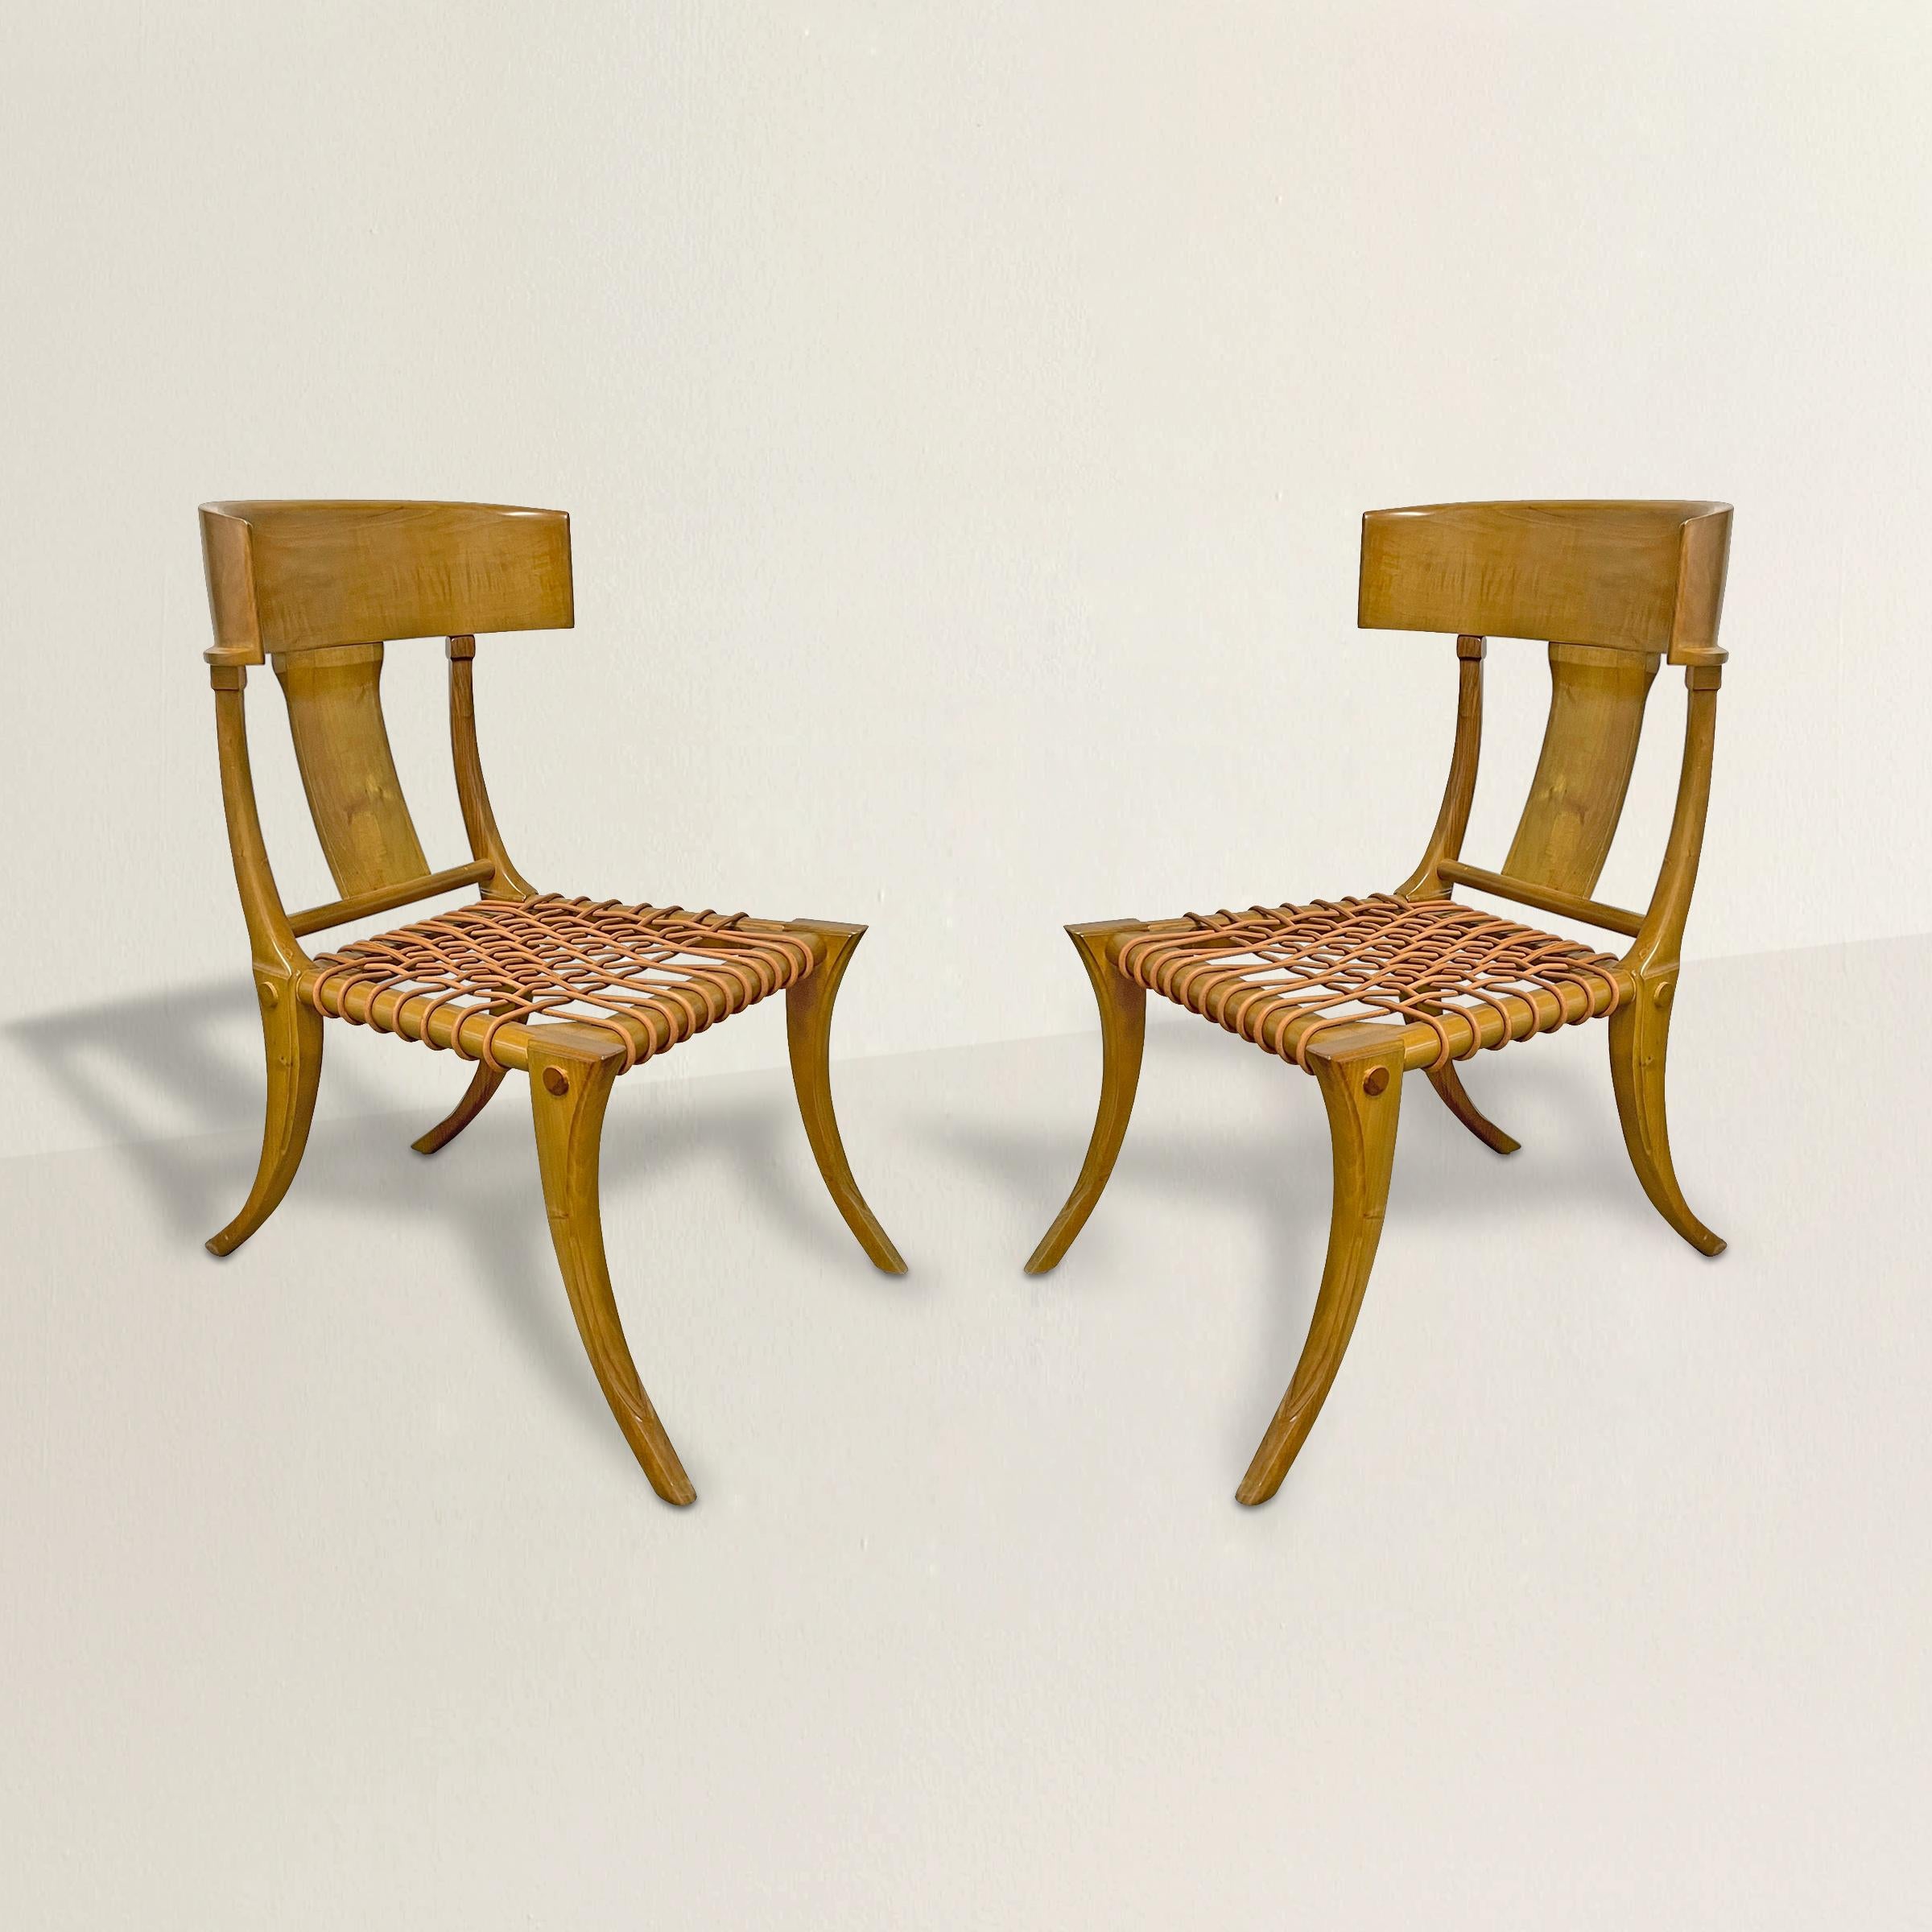 An incredible pair of late 20th century American Kreiss Klismos side chairs with a deeply curved crestrail, saber-style legs in front and back, and a woven leather seat. Chairs are perfectly scaled for use as occasional chairs in a living room or at